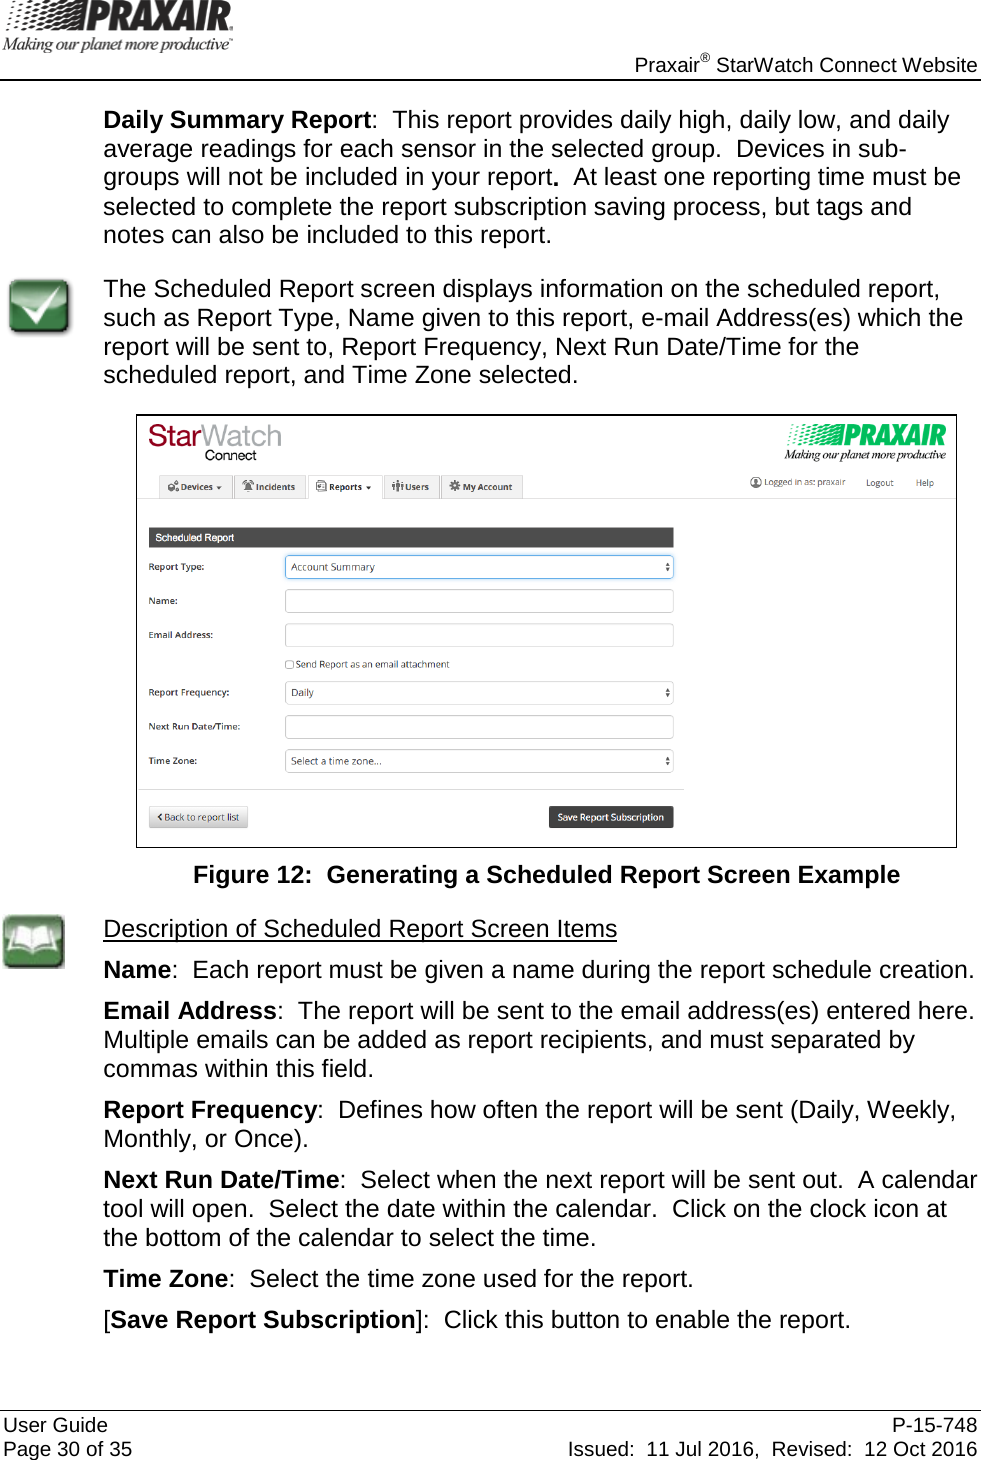    Praxair® StarWatch Connect Website User Guide  P-15-748 Page 30 of 35 Issued:  11 Jul 2016,  Revised:  12 Oct 2016 Daily Summary Report:  This report provides daily high, daily low, and daily average readings for each sensor in the selected group.  Devices in sub-groups will not be included in your report.  At least one reporting time must be selected to complete the report subscription saving process, but tags and notes can also be included to this report.  The Scheduled Report screen displays information on the scheduled report, such as Report Type, Name given to this report, e-mail Address(es) which the report will be sent to, Report Frequency, Next Run Date/Time for the scheduled report, and Time Zone selected.    Figure 12:  Generating a Scheduled Report Screen Example  Description of Scheduled Report Screen Items Name:  Each report must be given a name during the report schedule creation. Email Address:  The report will be sent to the email address(es) entered here.  Multiple emails can be added as report recipients, and must separated by commas within this field. Report Frequency:  Defines how often the report will be sent (Daily, Weekly, Monthly, or Once). Next Run Date/Time:  Select when the next report will be sent out.  A calendar tool will open.  Select the date within the calendar.  Click on the clock icon at the bottom of the calendar to select the time. Time Zone:  Select the time zone used for the report. [Save Report Subscription]:  Click this button to enable the report. 